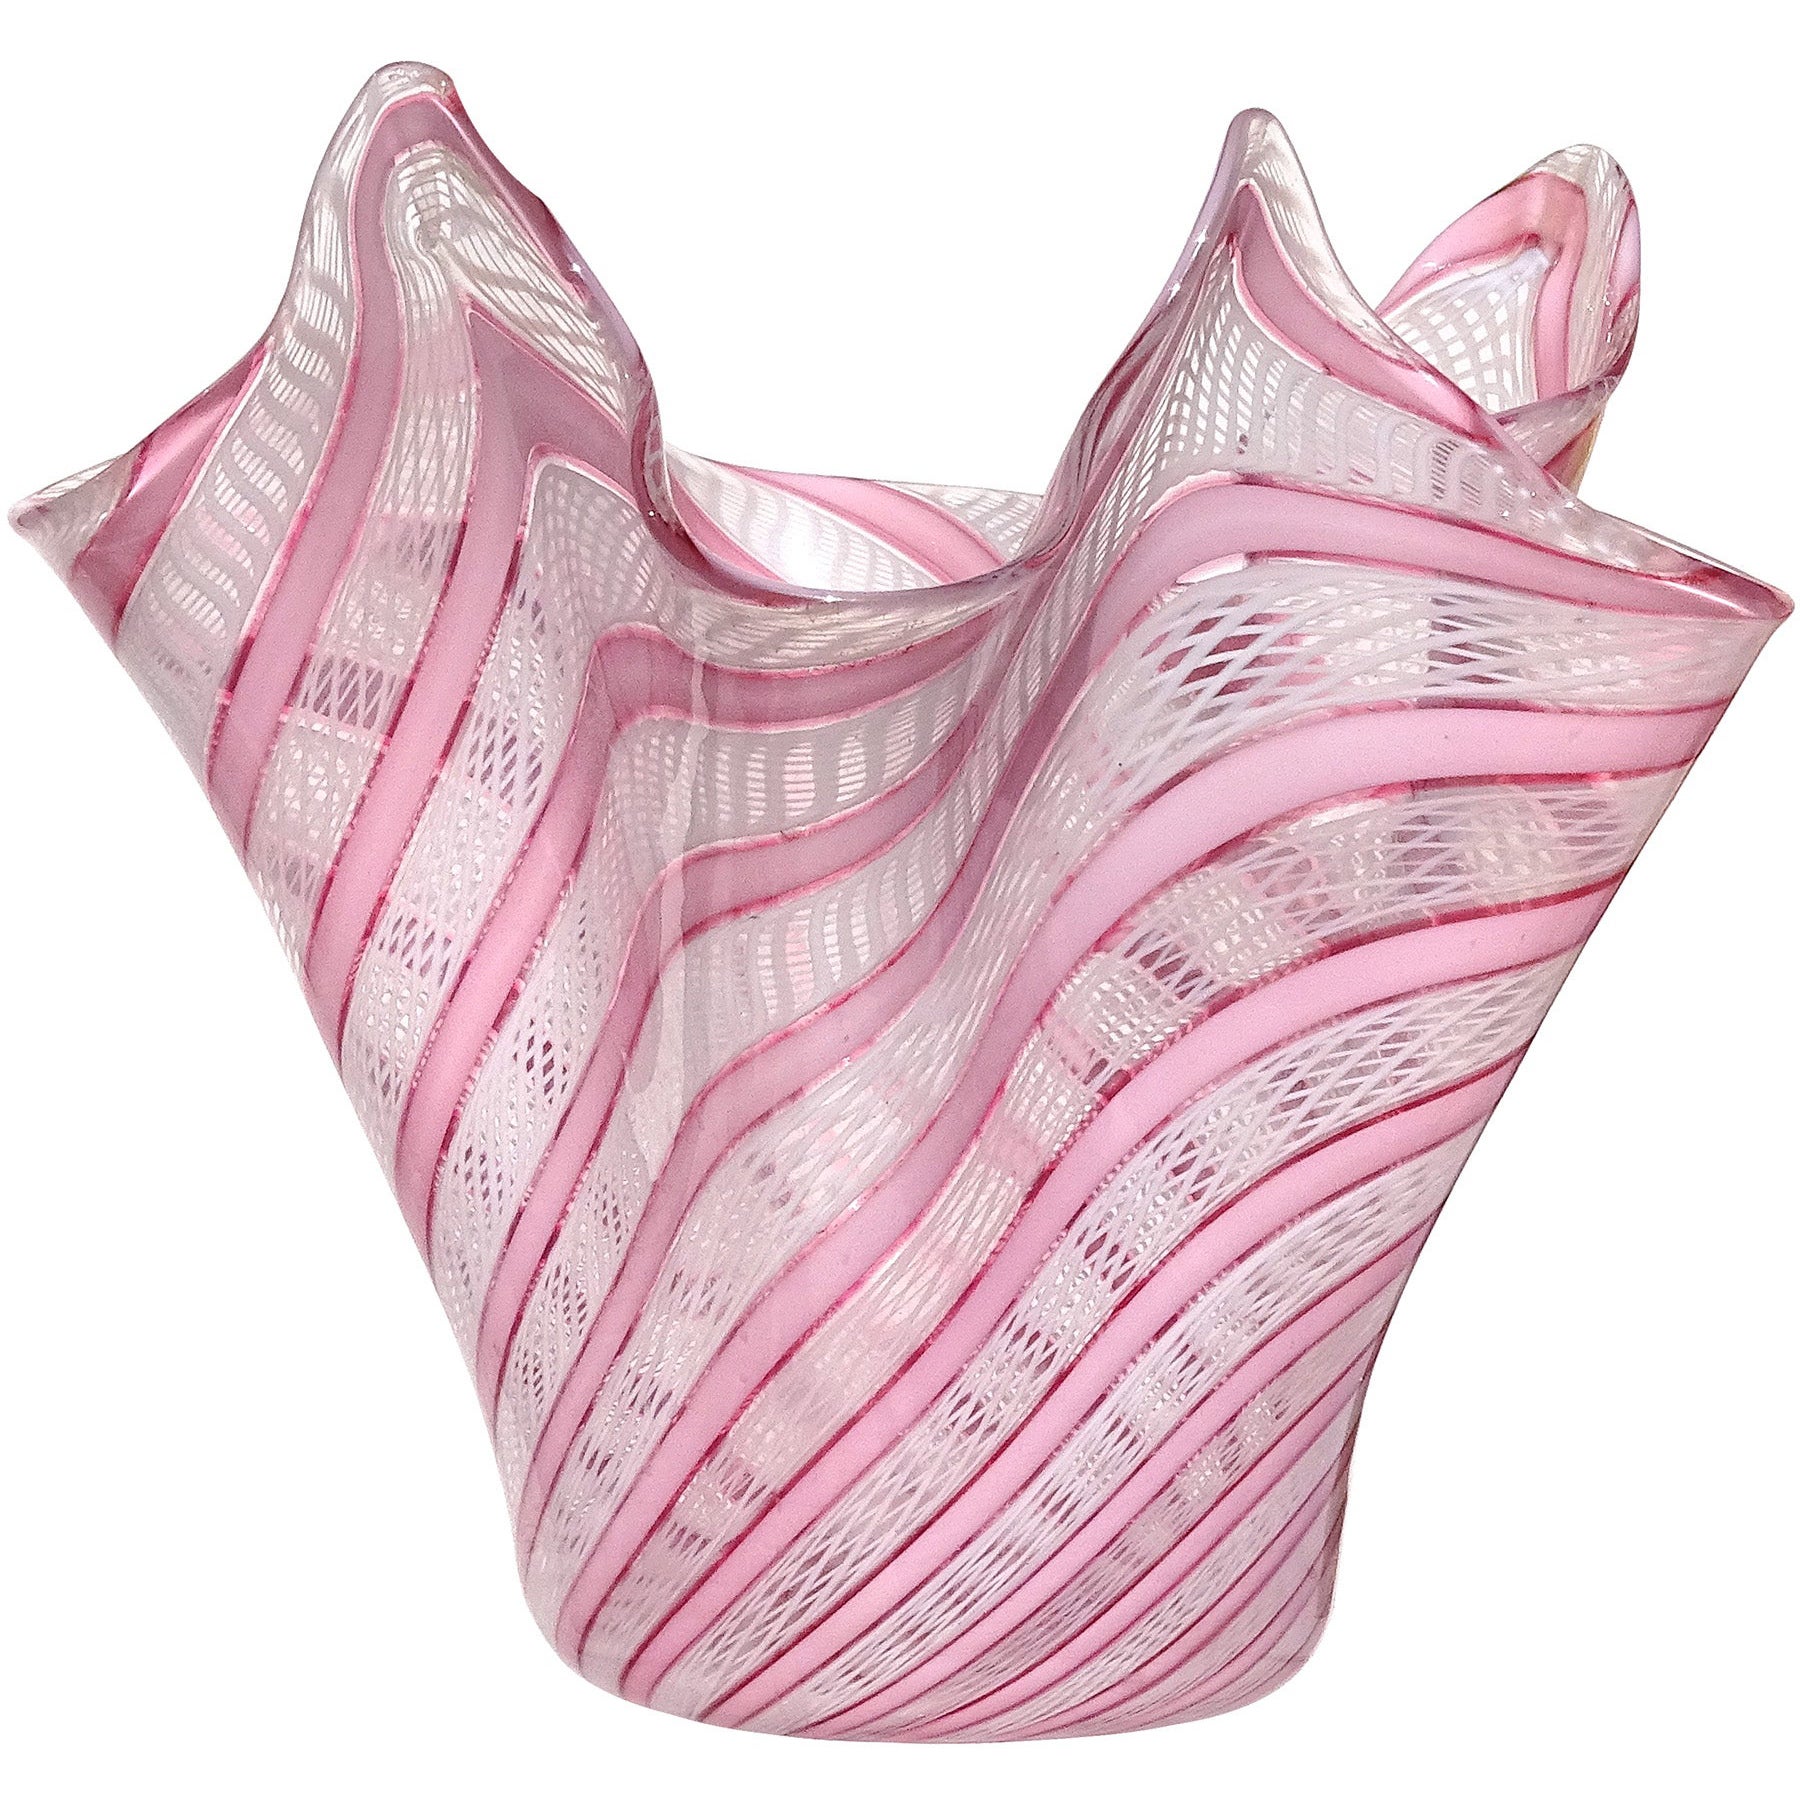 Fratelli Toso Murano Pink White Ribbons Italian Art Glass Fazzoletto Flower Vase For Sale